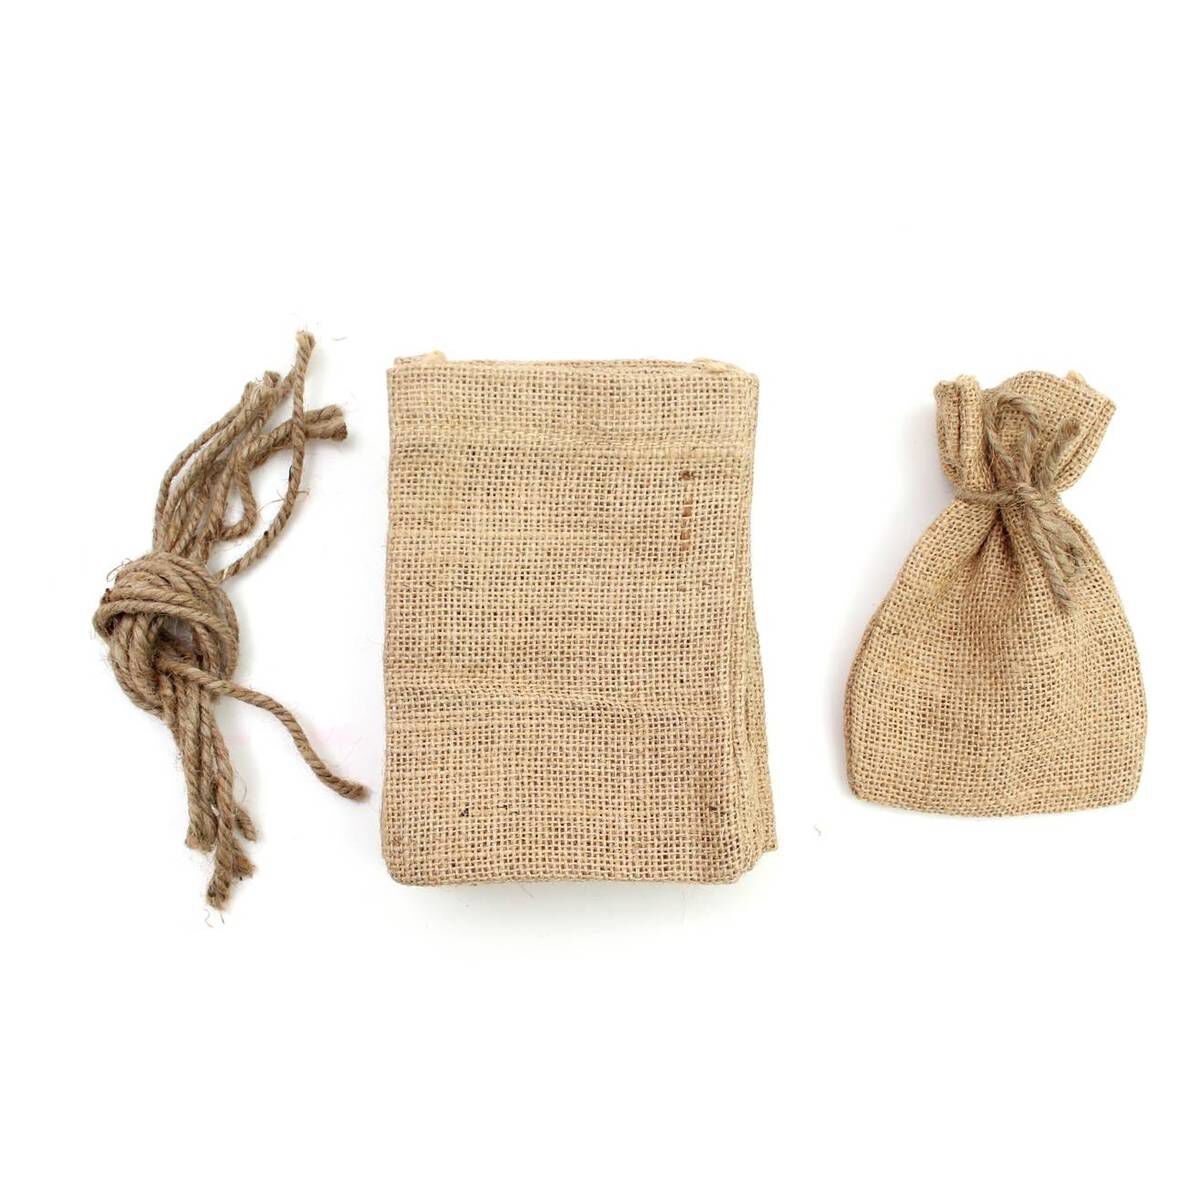 Amazon.com: Burlap Bags 5 x 4 Inch with Drawstring -Natural Linen Bag Gift  Bags Jewelry Sacks Strong Small Jute Bag for Festivals, DIY Craft, Present,  Party Favors, Snacks, Jewelry and Anniversaries :